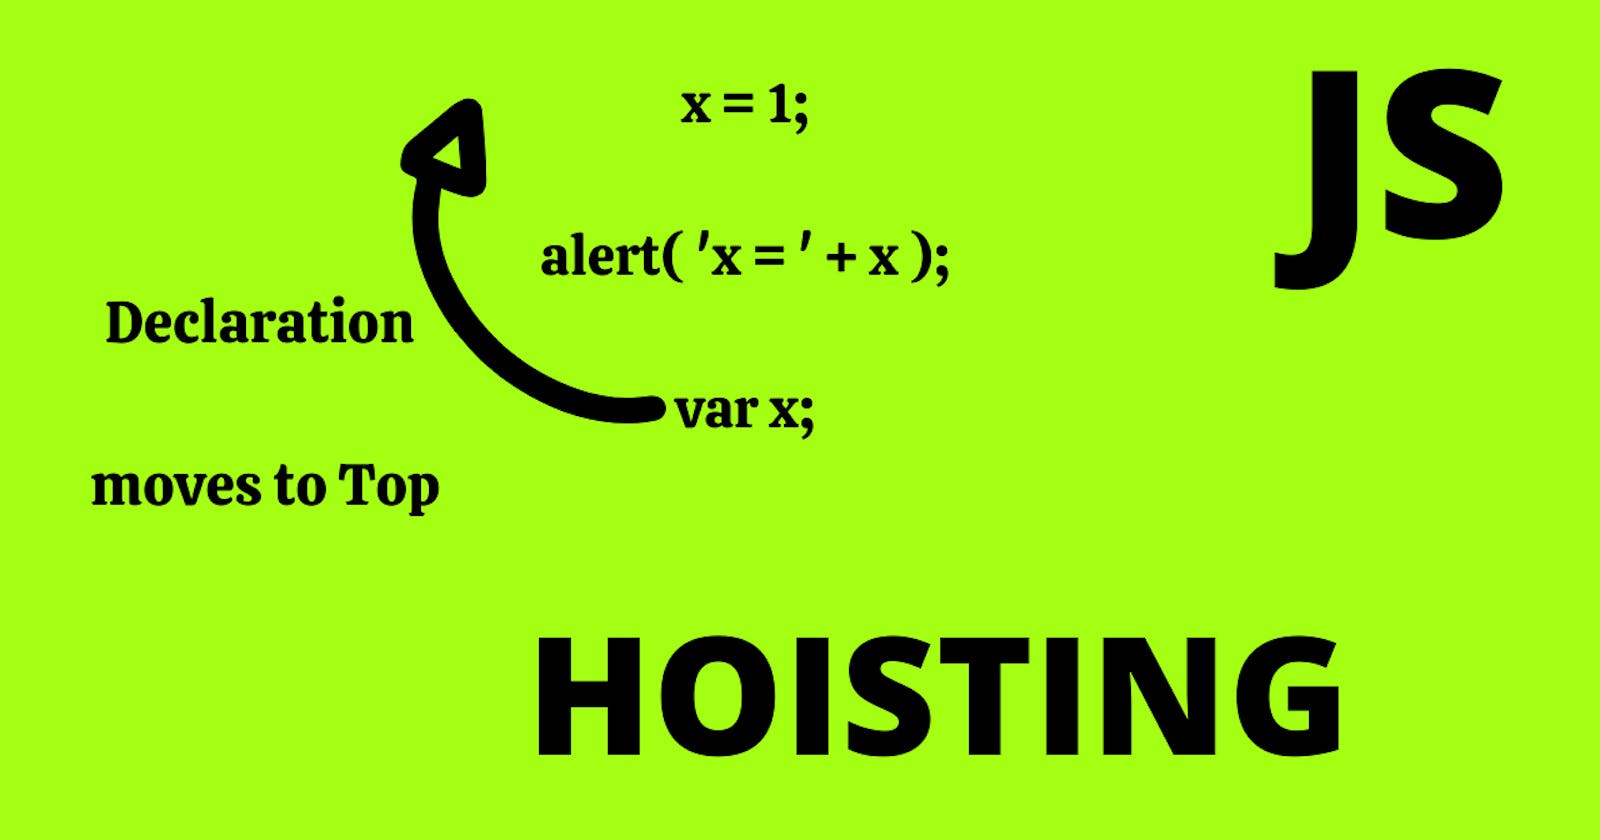 Hoisting and Temporal dead zone(TDZ) in Javascript.